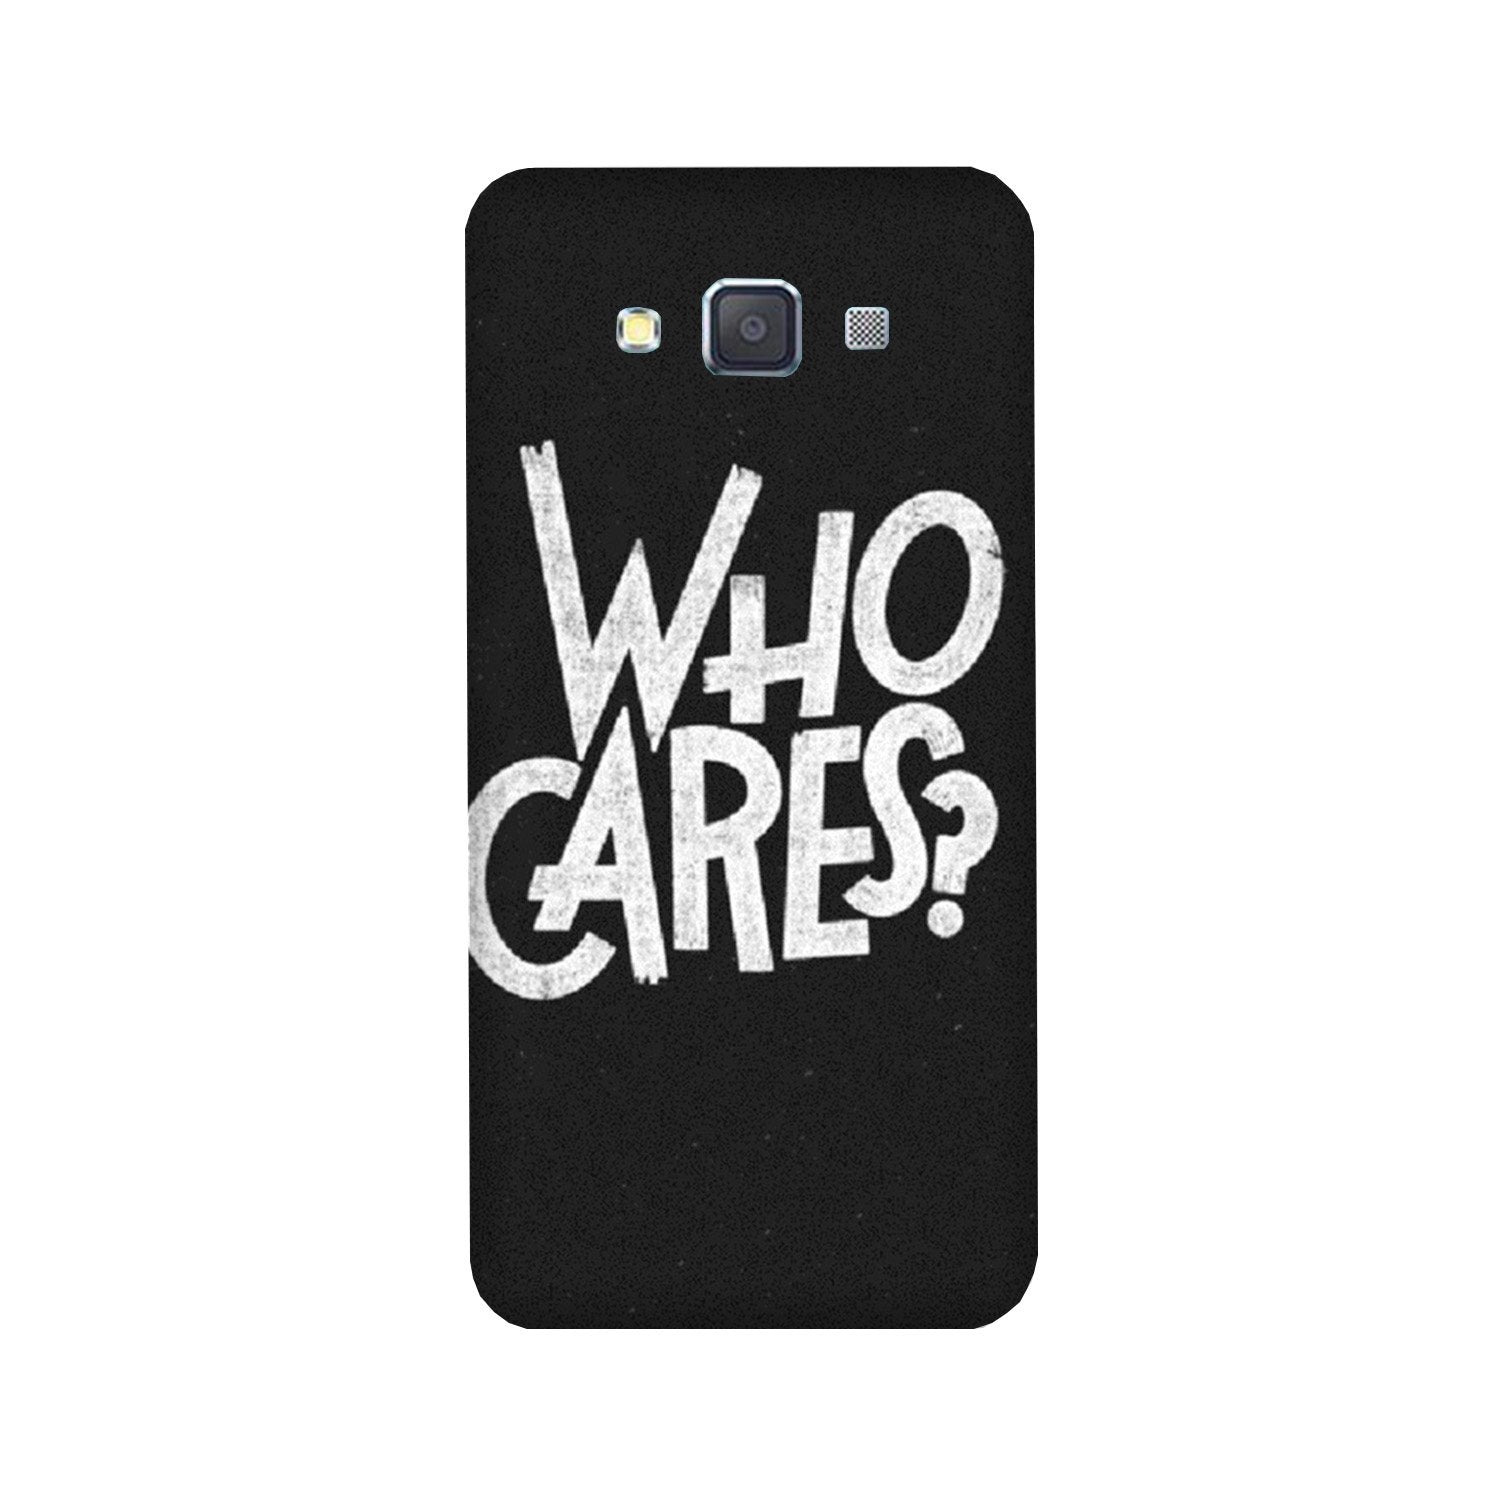 Who Cares Case for Galaxy J7 (2016)